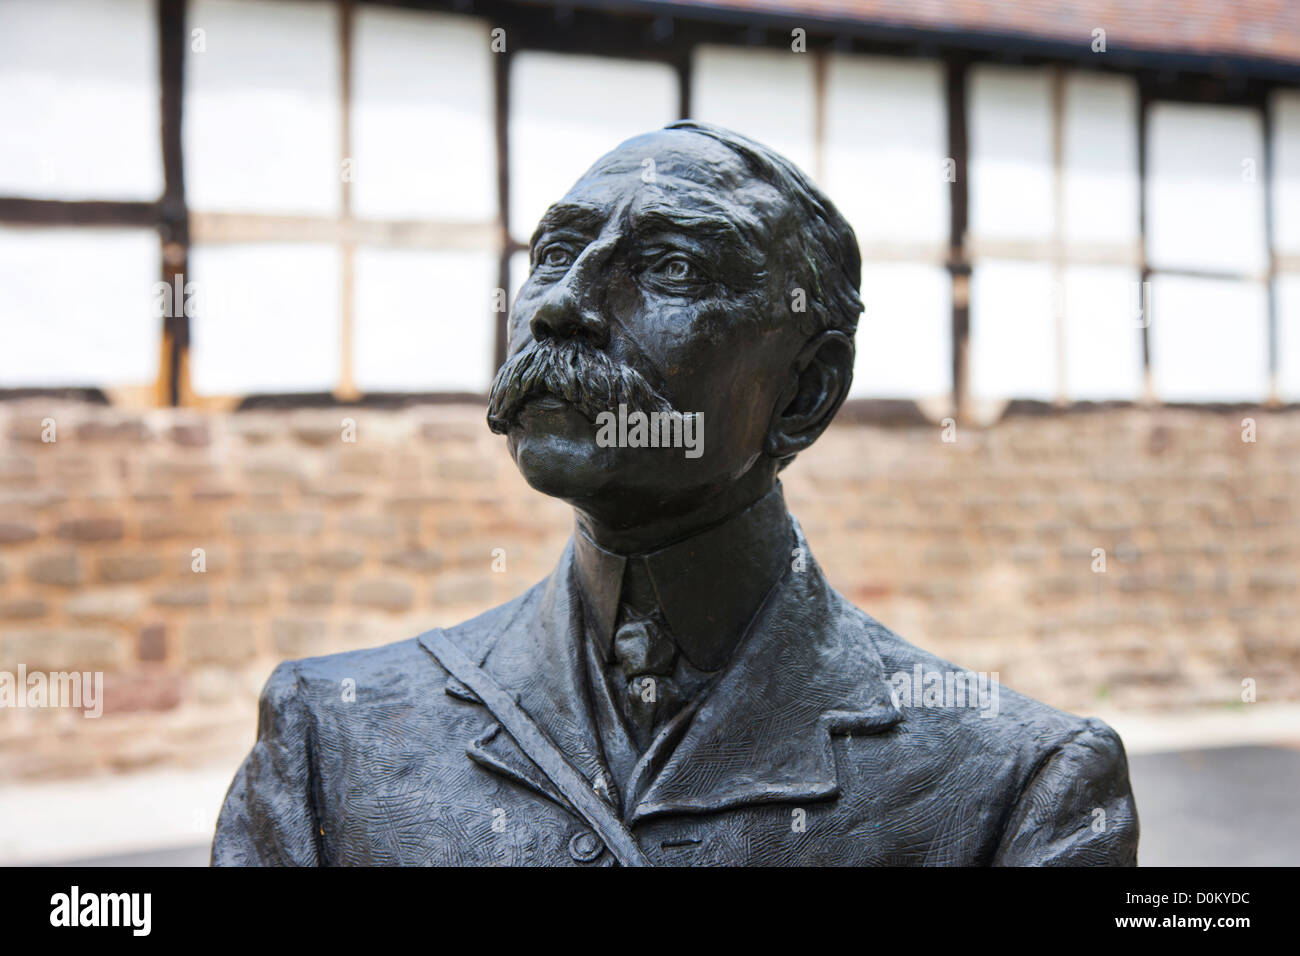 A statue of Elgar in the grounds of Hereford Cathedral. Stock Photo